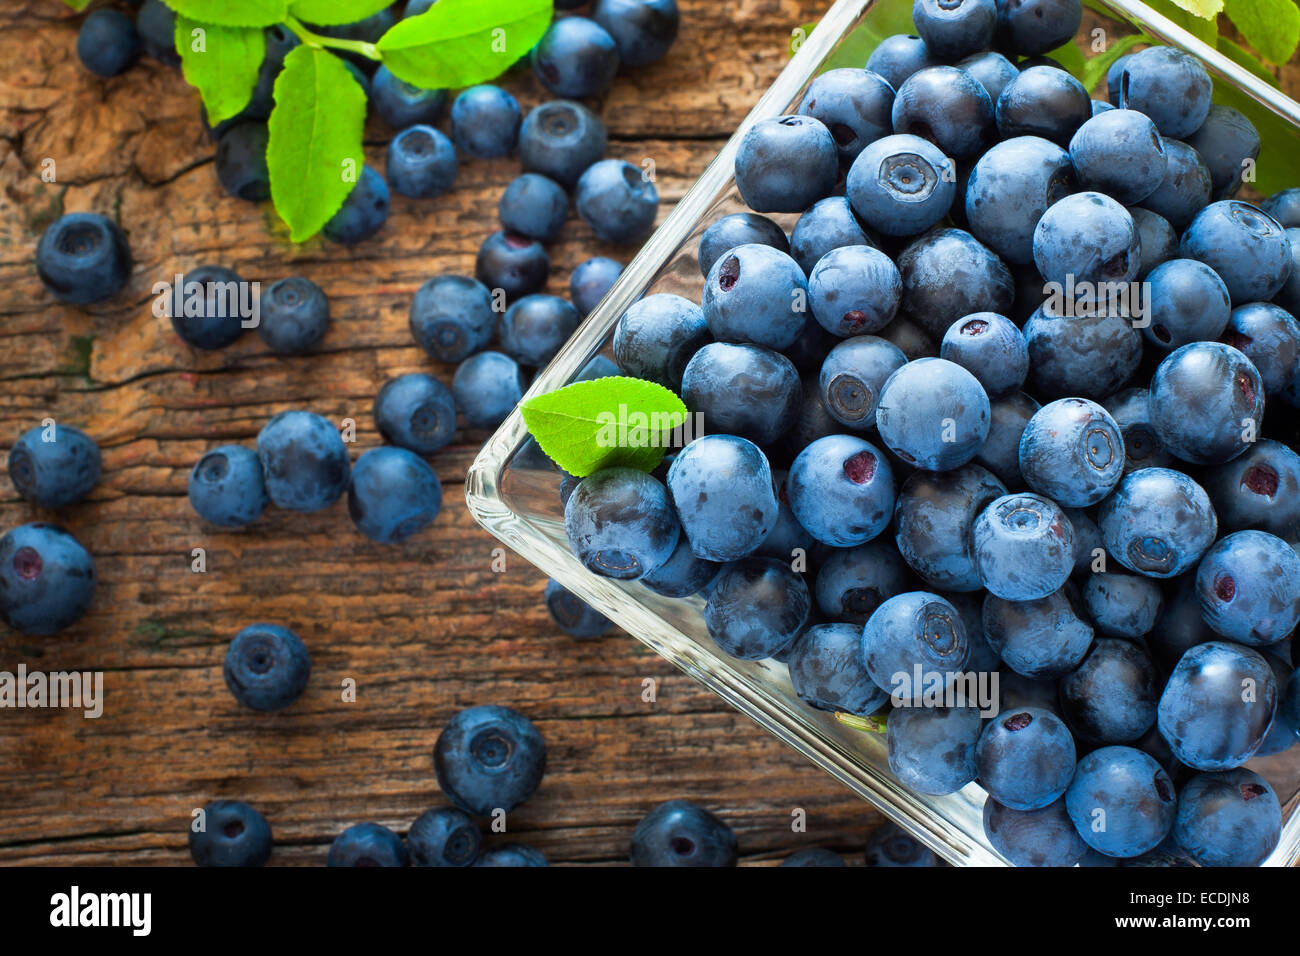 Ripe blueberries in small bowl Stock Photo